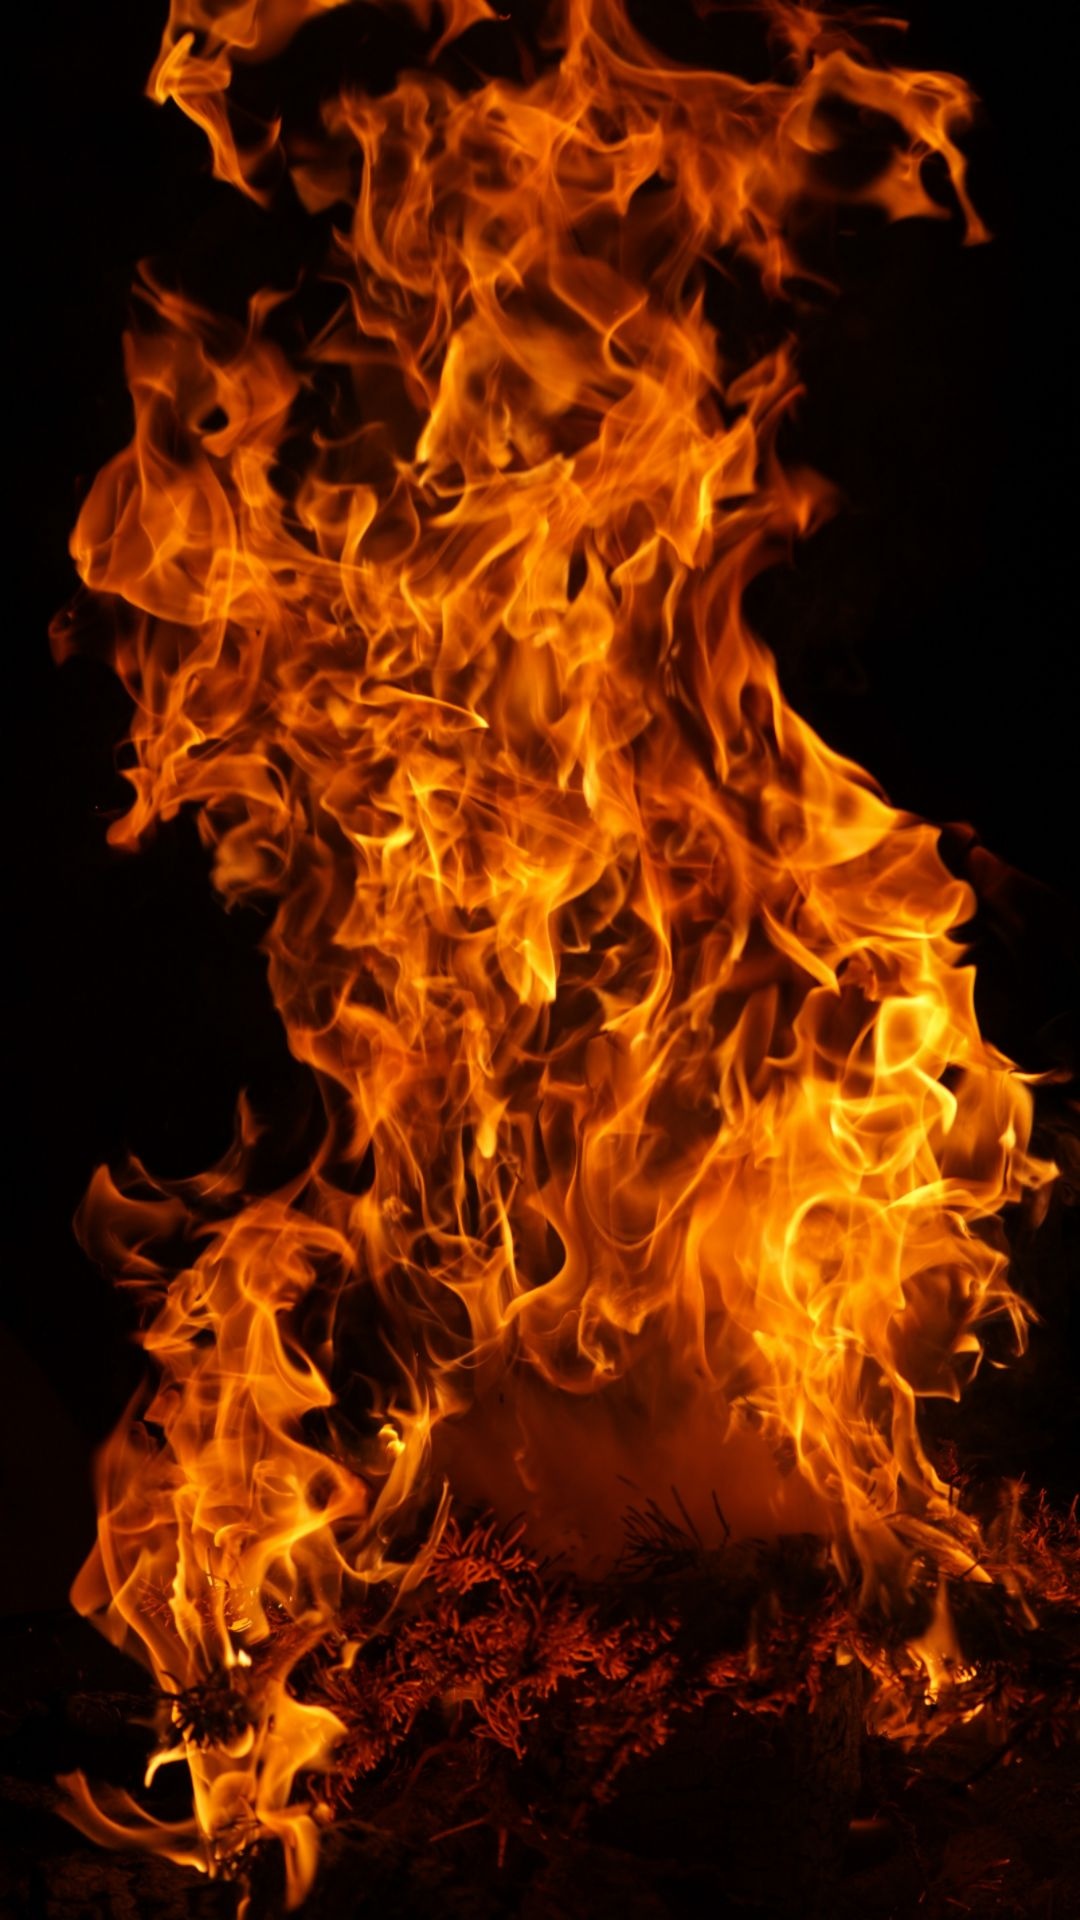 Top best quality fire wallpapers, Captivating visuals, Mesmerizing flames, Dynamic energy, Fiery backdrop, 1080x1920 Full HD Phone